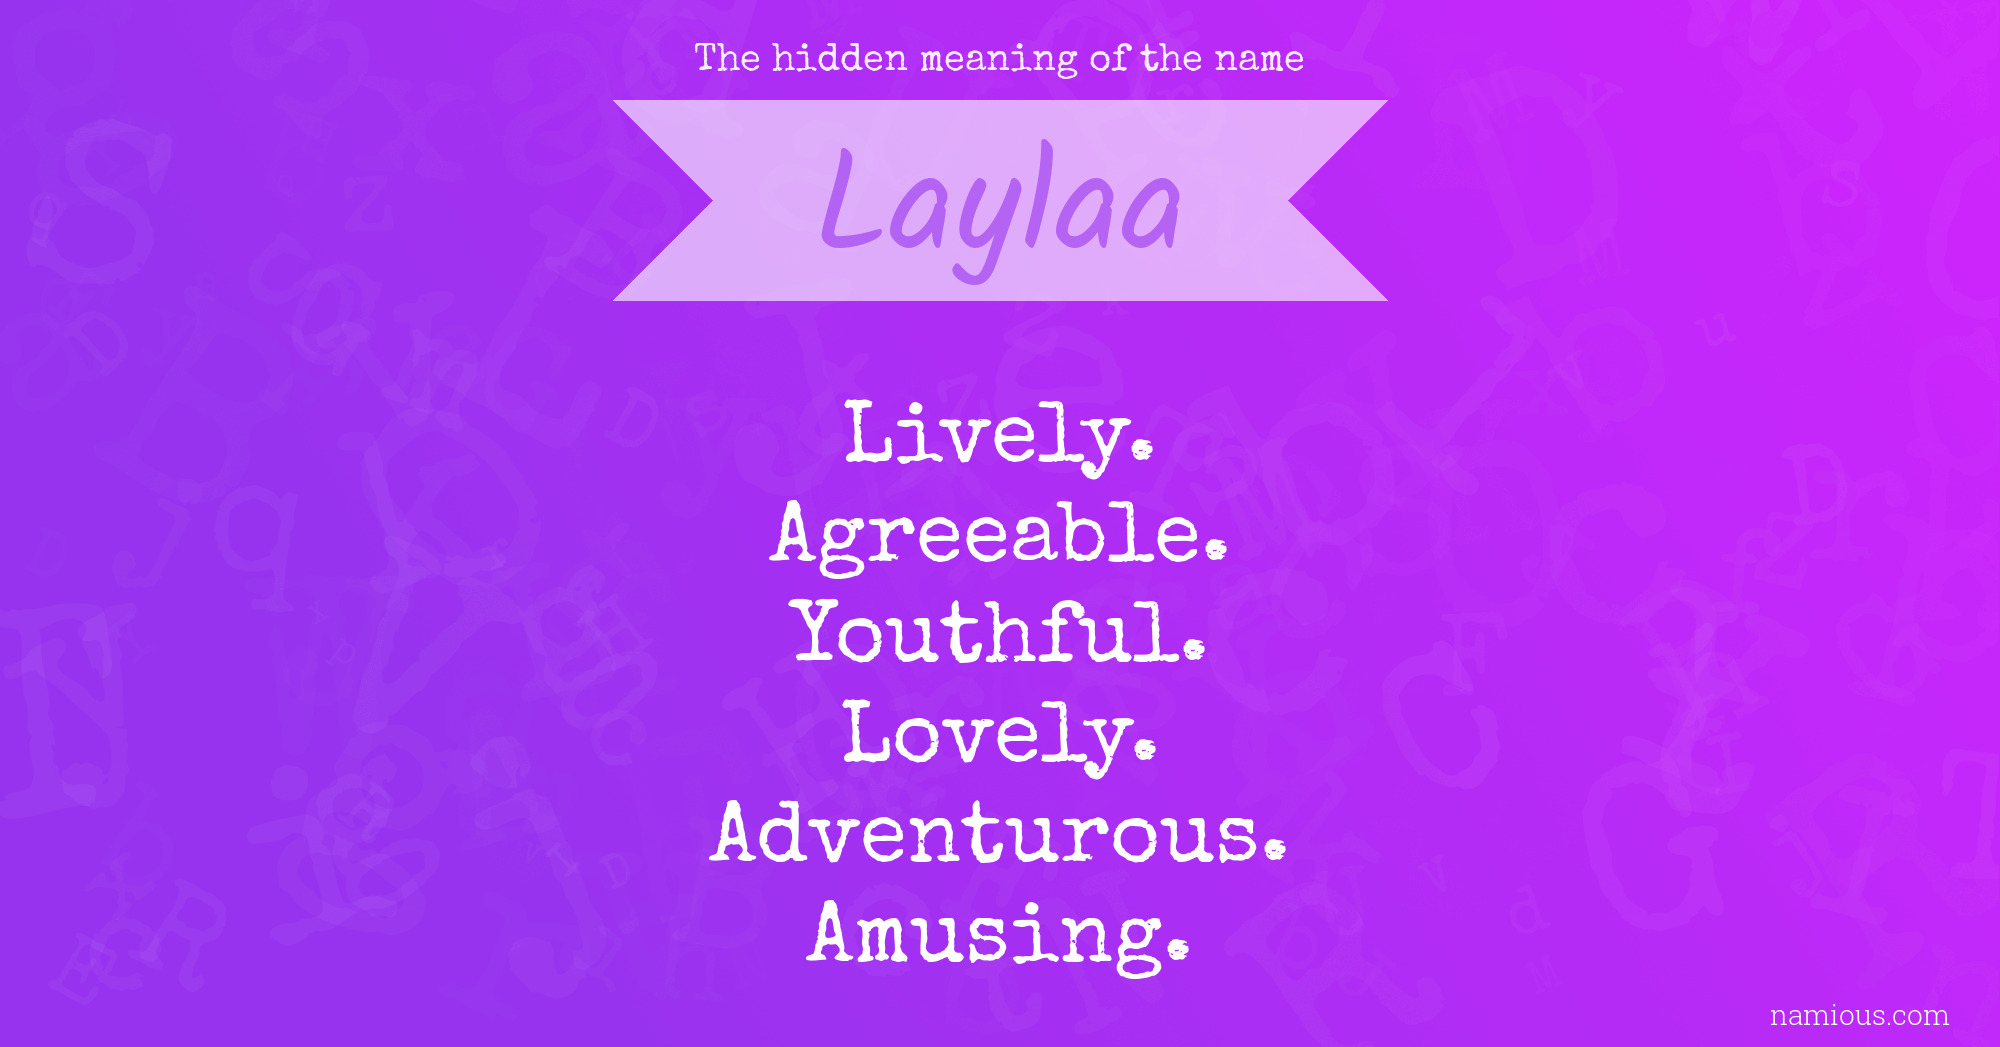 The hidden meaning of the name Laylaa